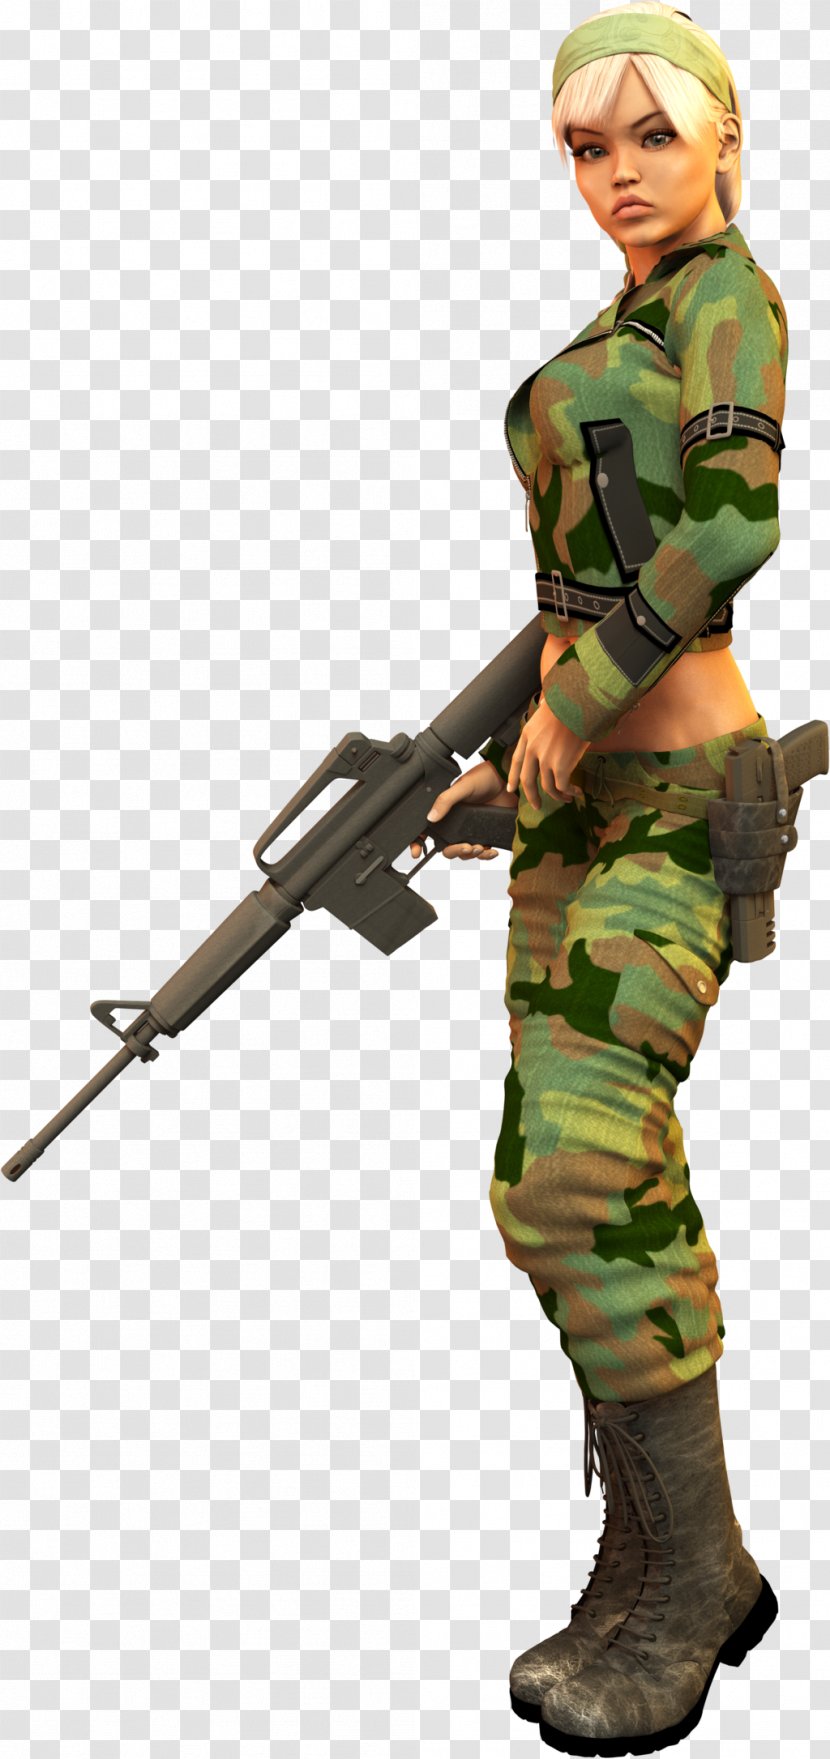 Soldier Infantry Army Military - Frame Transparent PNG